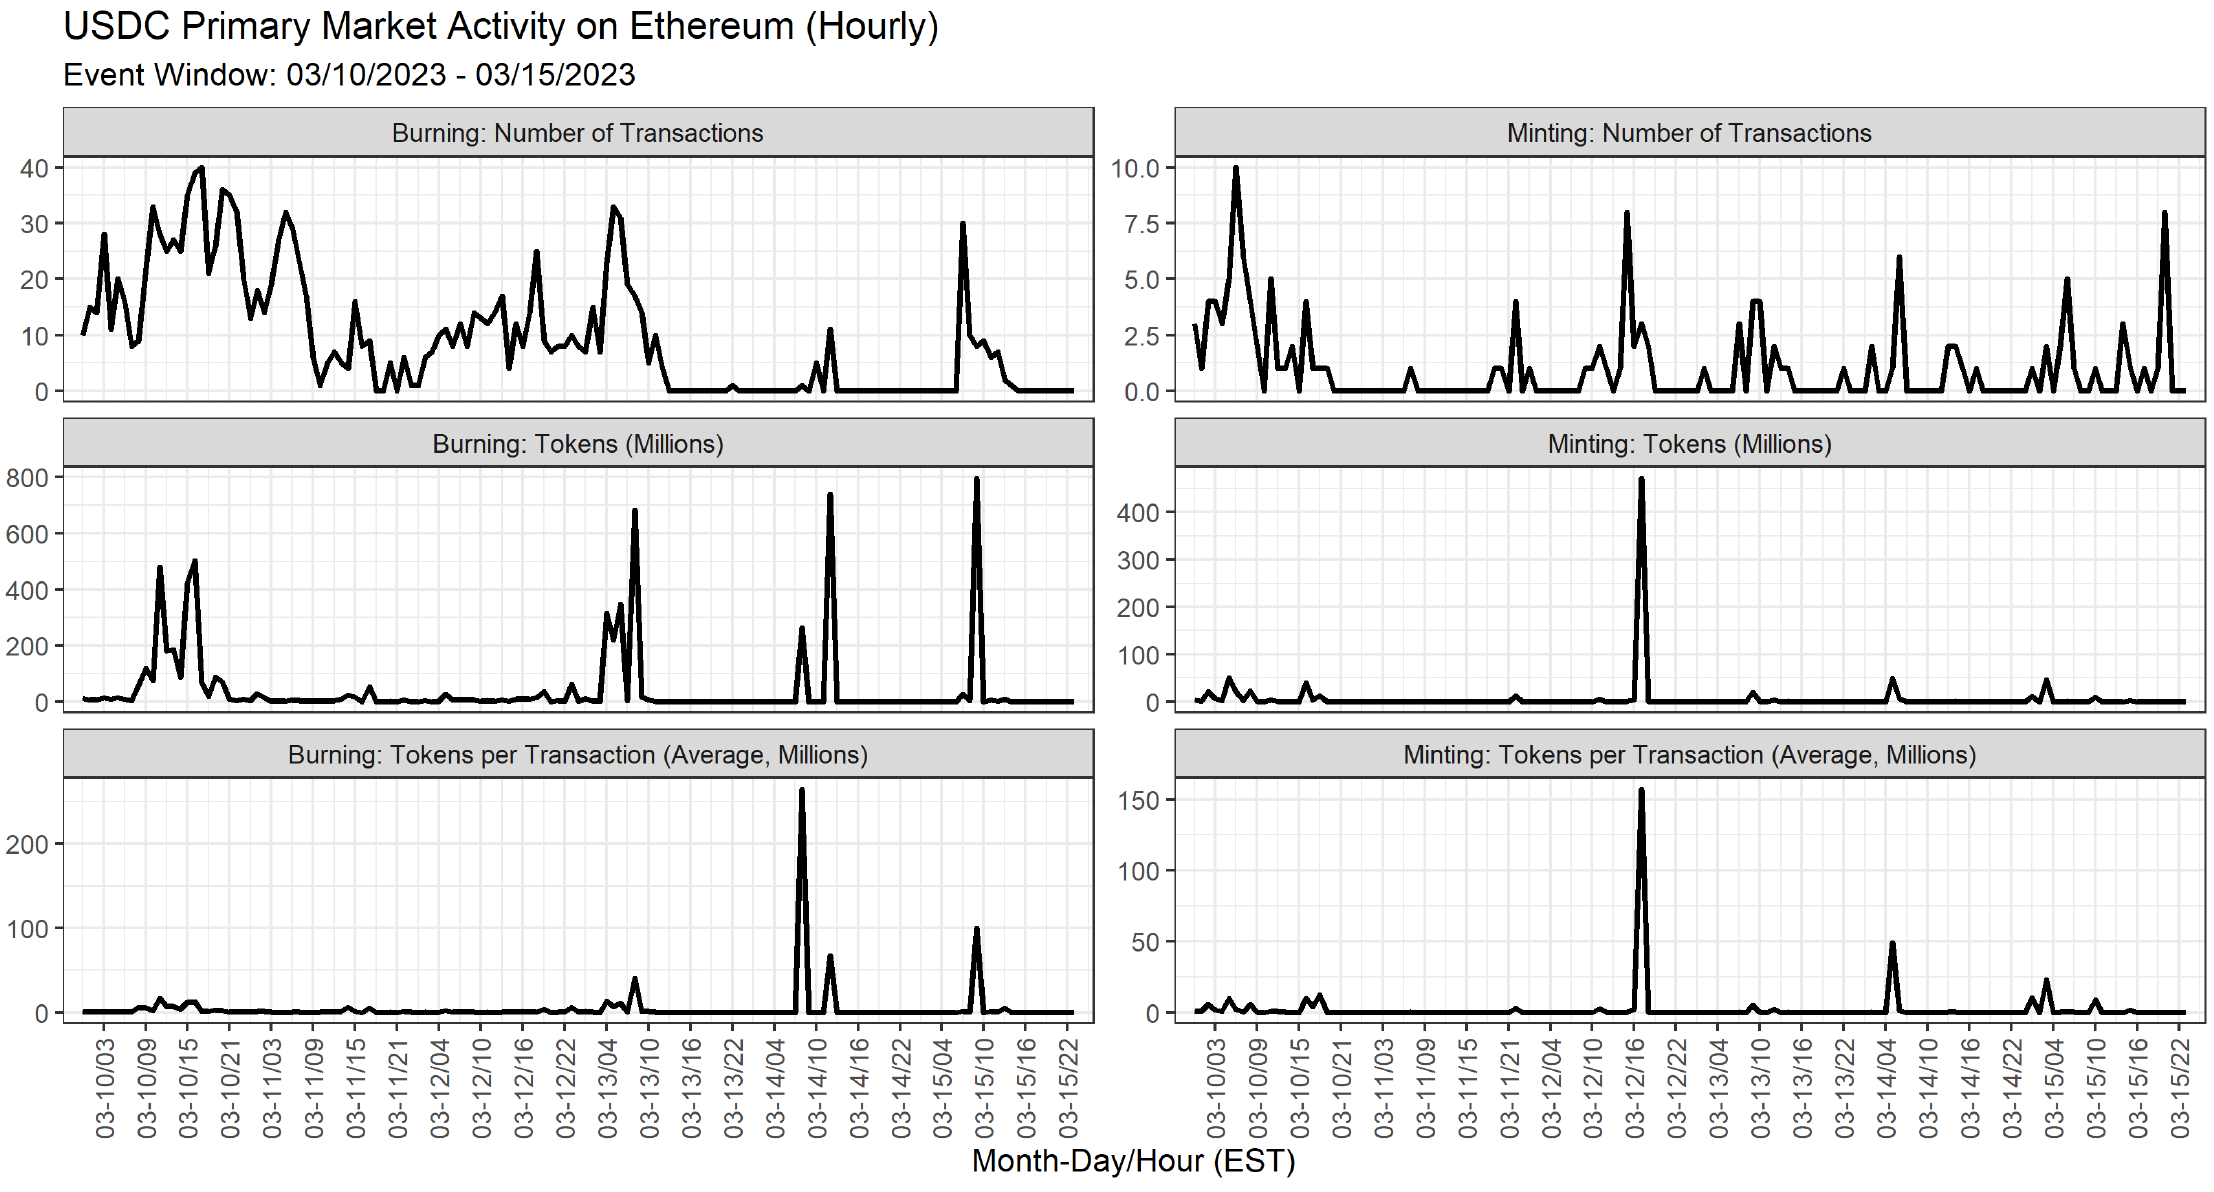 Figure 4. USDC's primary market activity on Ethereum during de-pegging event. See accessible link for data.